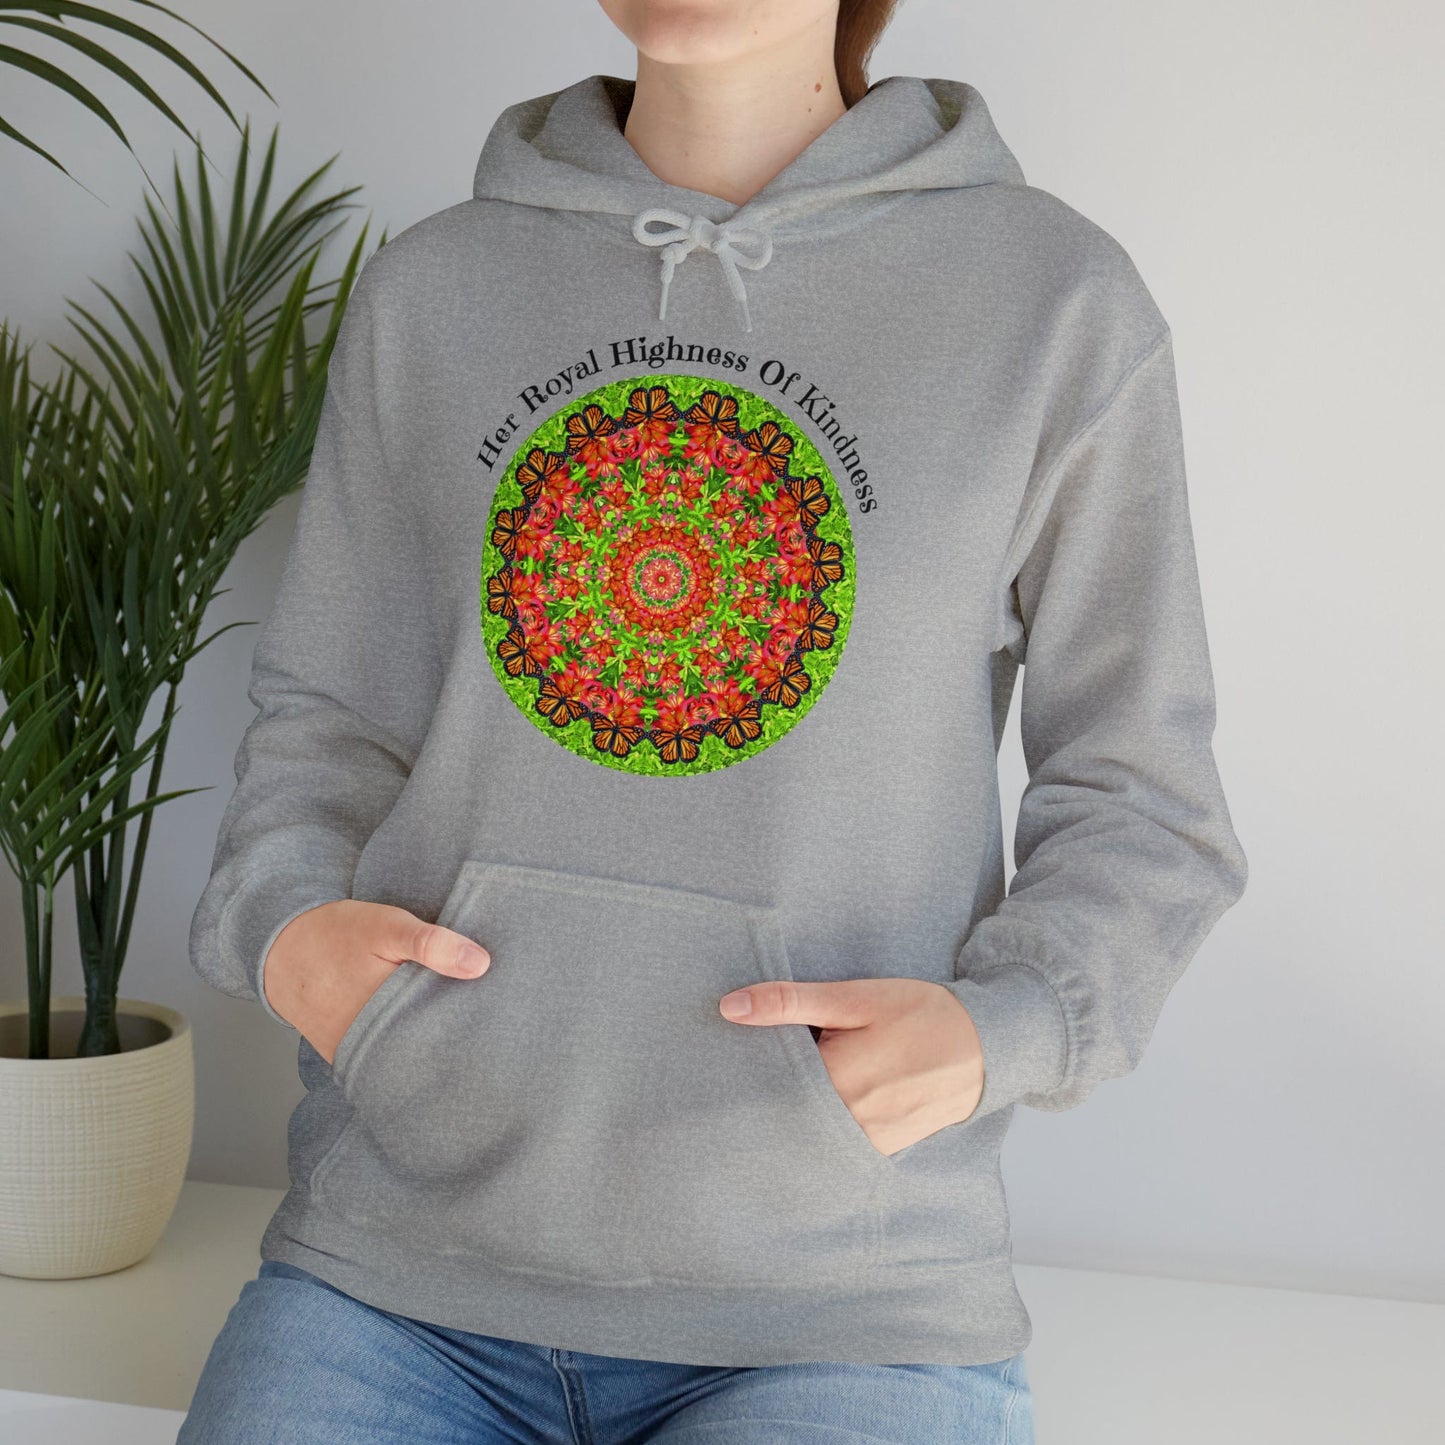 Pretty & Cute Butterfly Kindness Graphic Hoodie Sweatshirt Monarch Butterfly Mandala Art Her Royal Highness Of Kindness sports grey